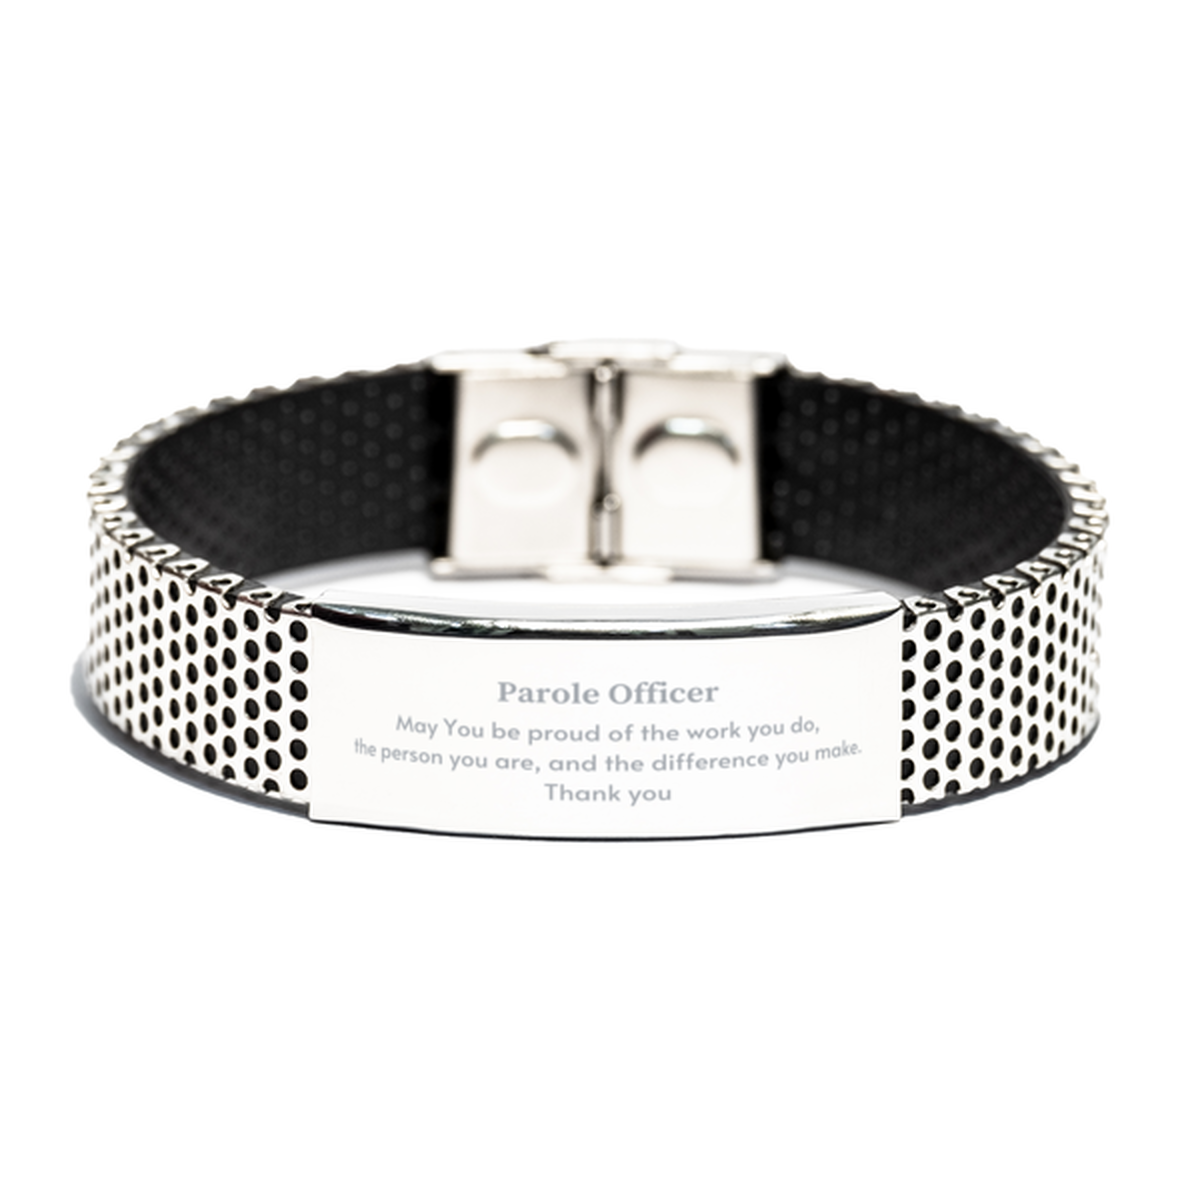 Heartwarming Stainless Steel Bracelet Retirement Coworkers Gifts for Parole Officer, Parole Officer May You be proud of the work you do, the person you are Gifts for Boss Men Women Friends